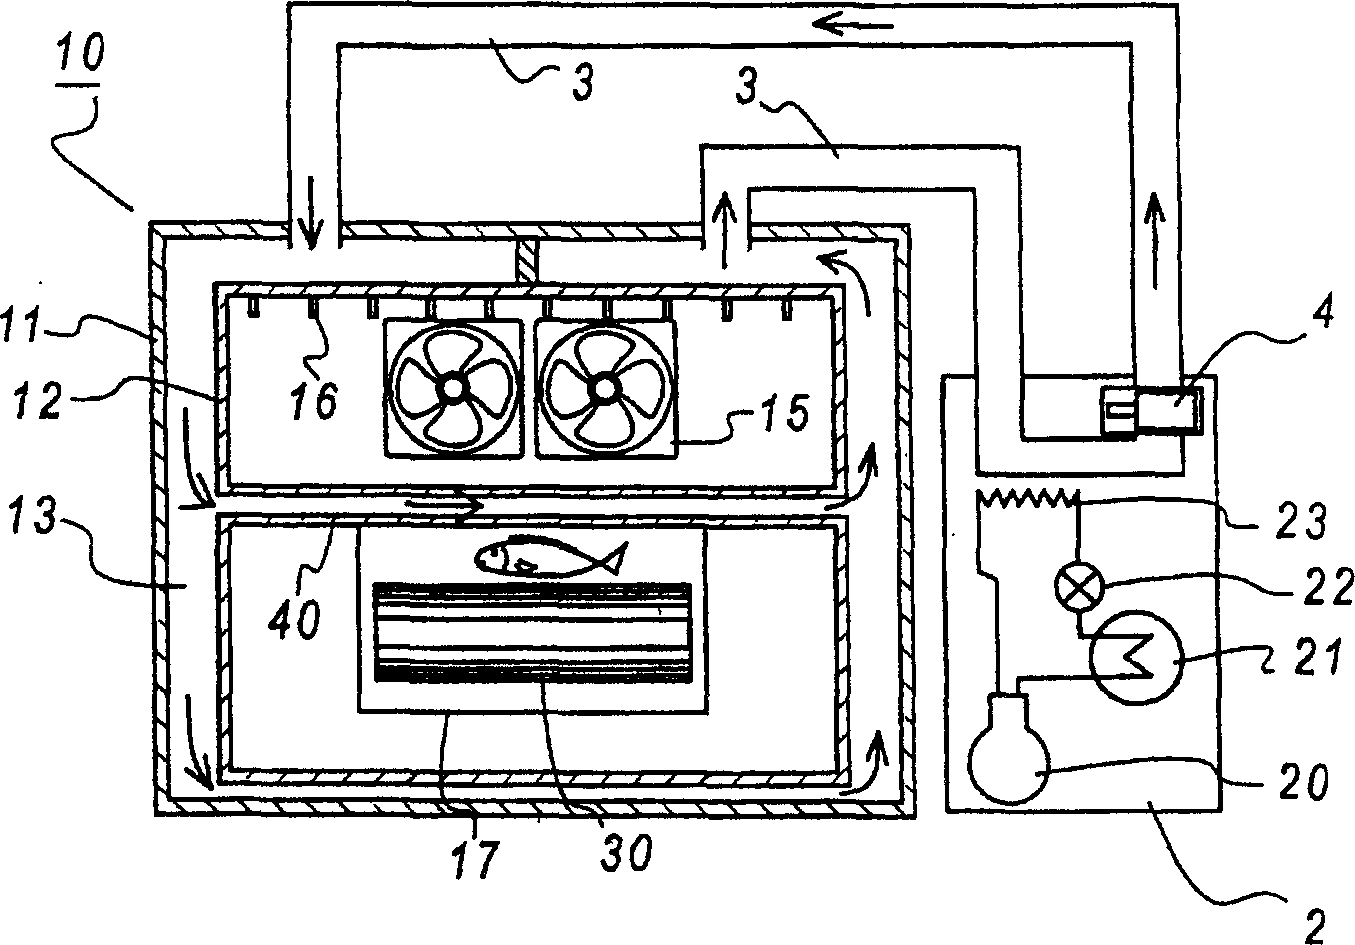 Double-walled continuous cooling system